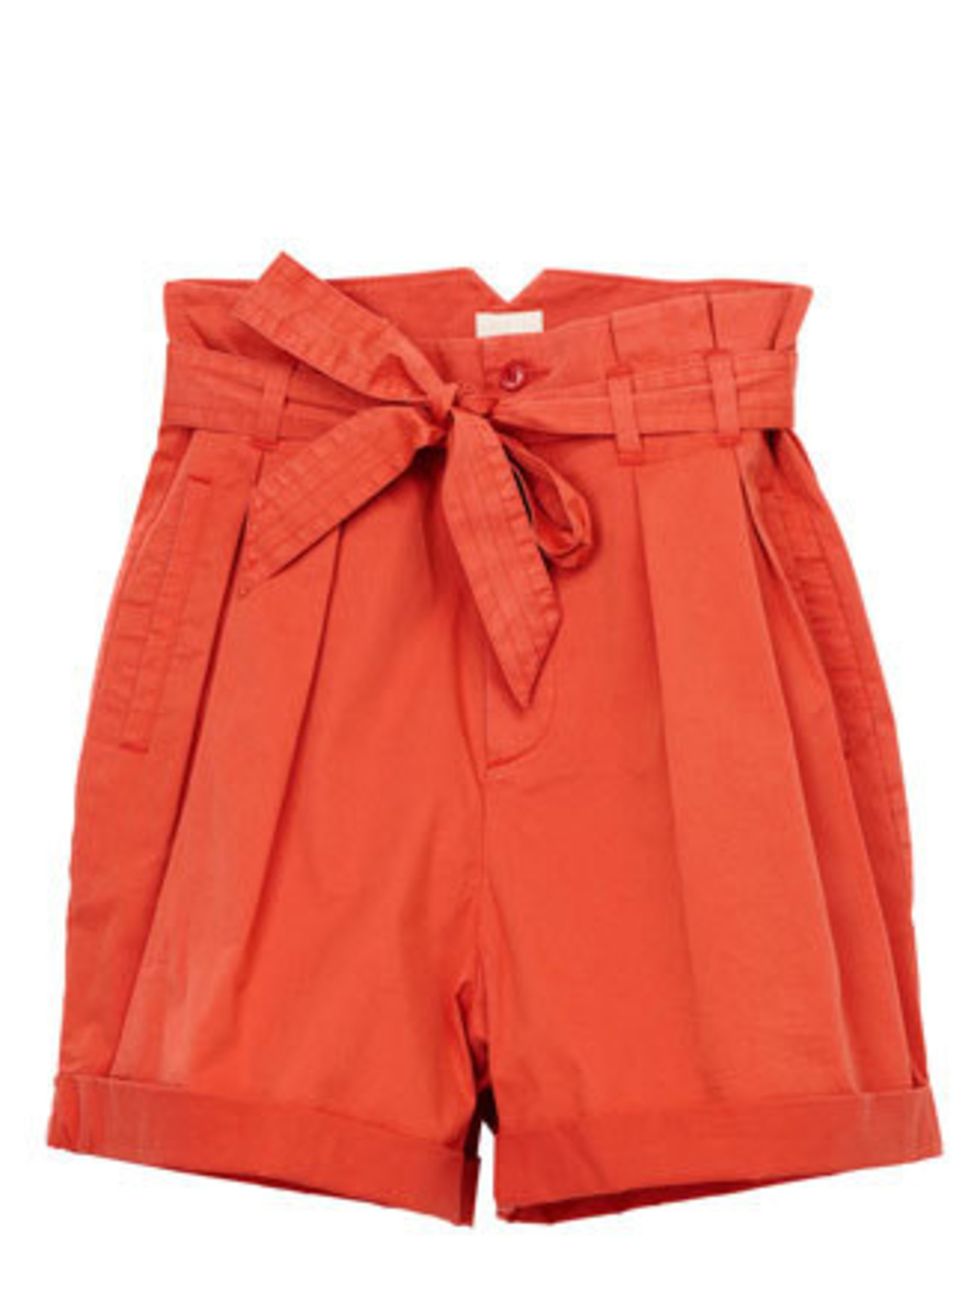 <p>The time has come to embrace shorts. This bright pair from H&amp;M are super flattering  not too tight or too short. Dress them up with a blazer or down with a simple vest. Oh and if your legs arent quite summer ready, <a href="http://blogs.elleuk.co